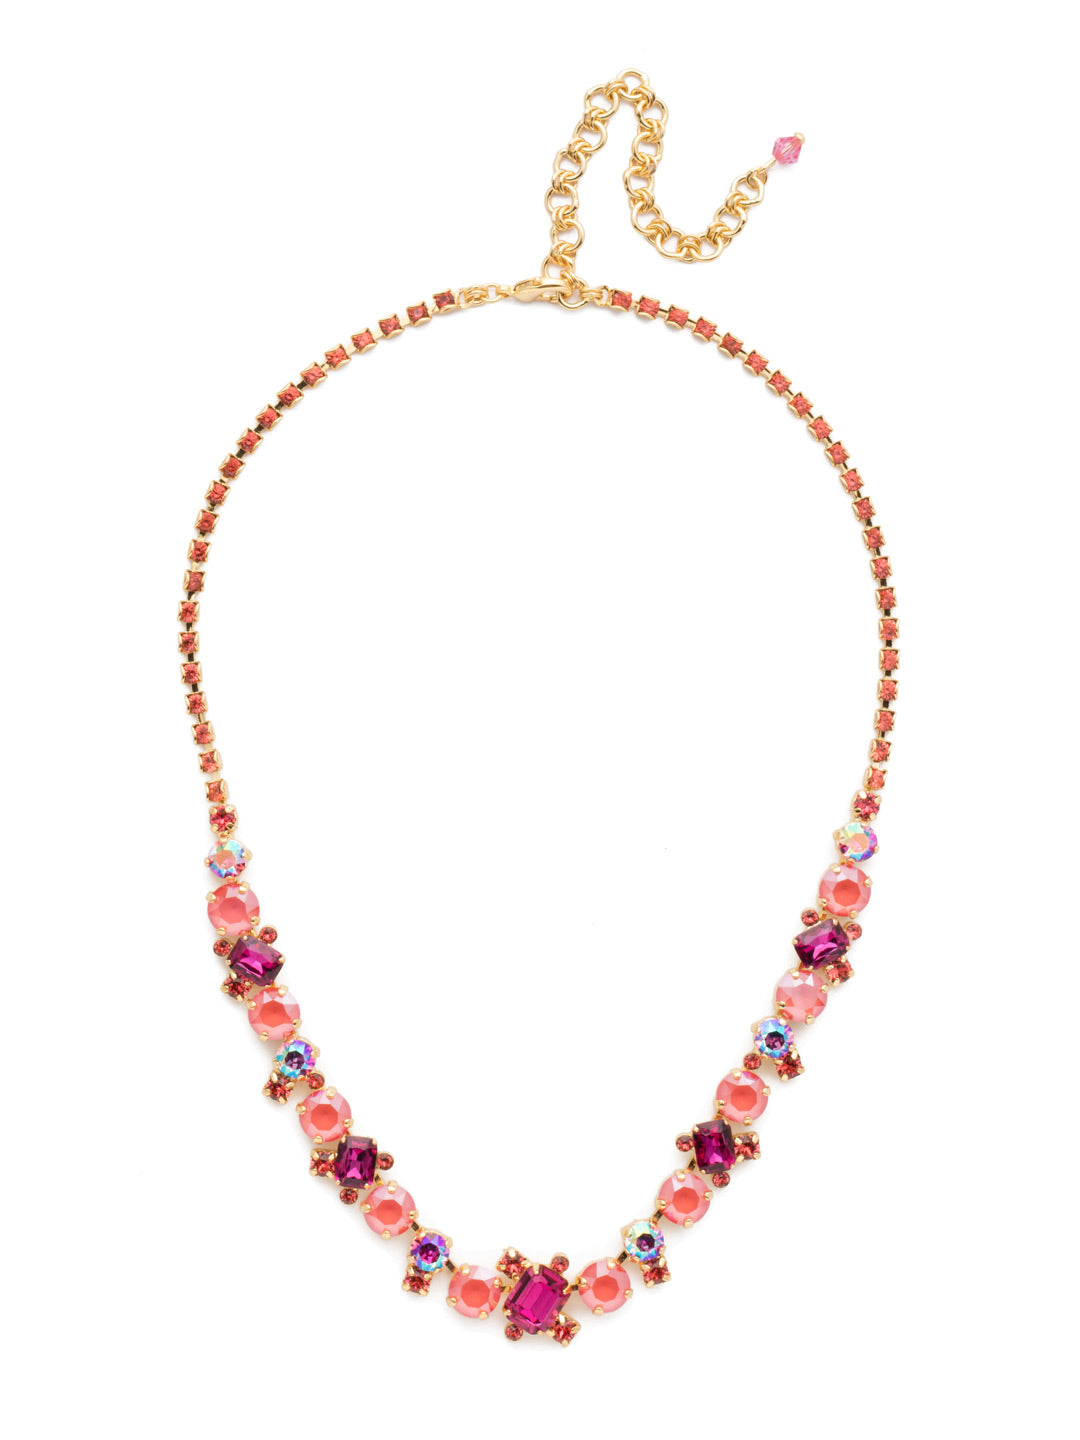 Sophisticated Tennis Necklace - NDK17BGBGA